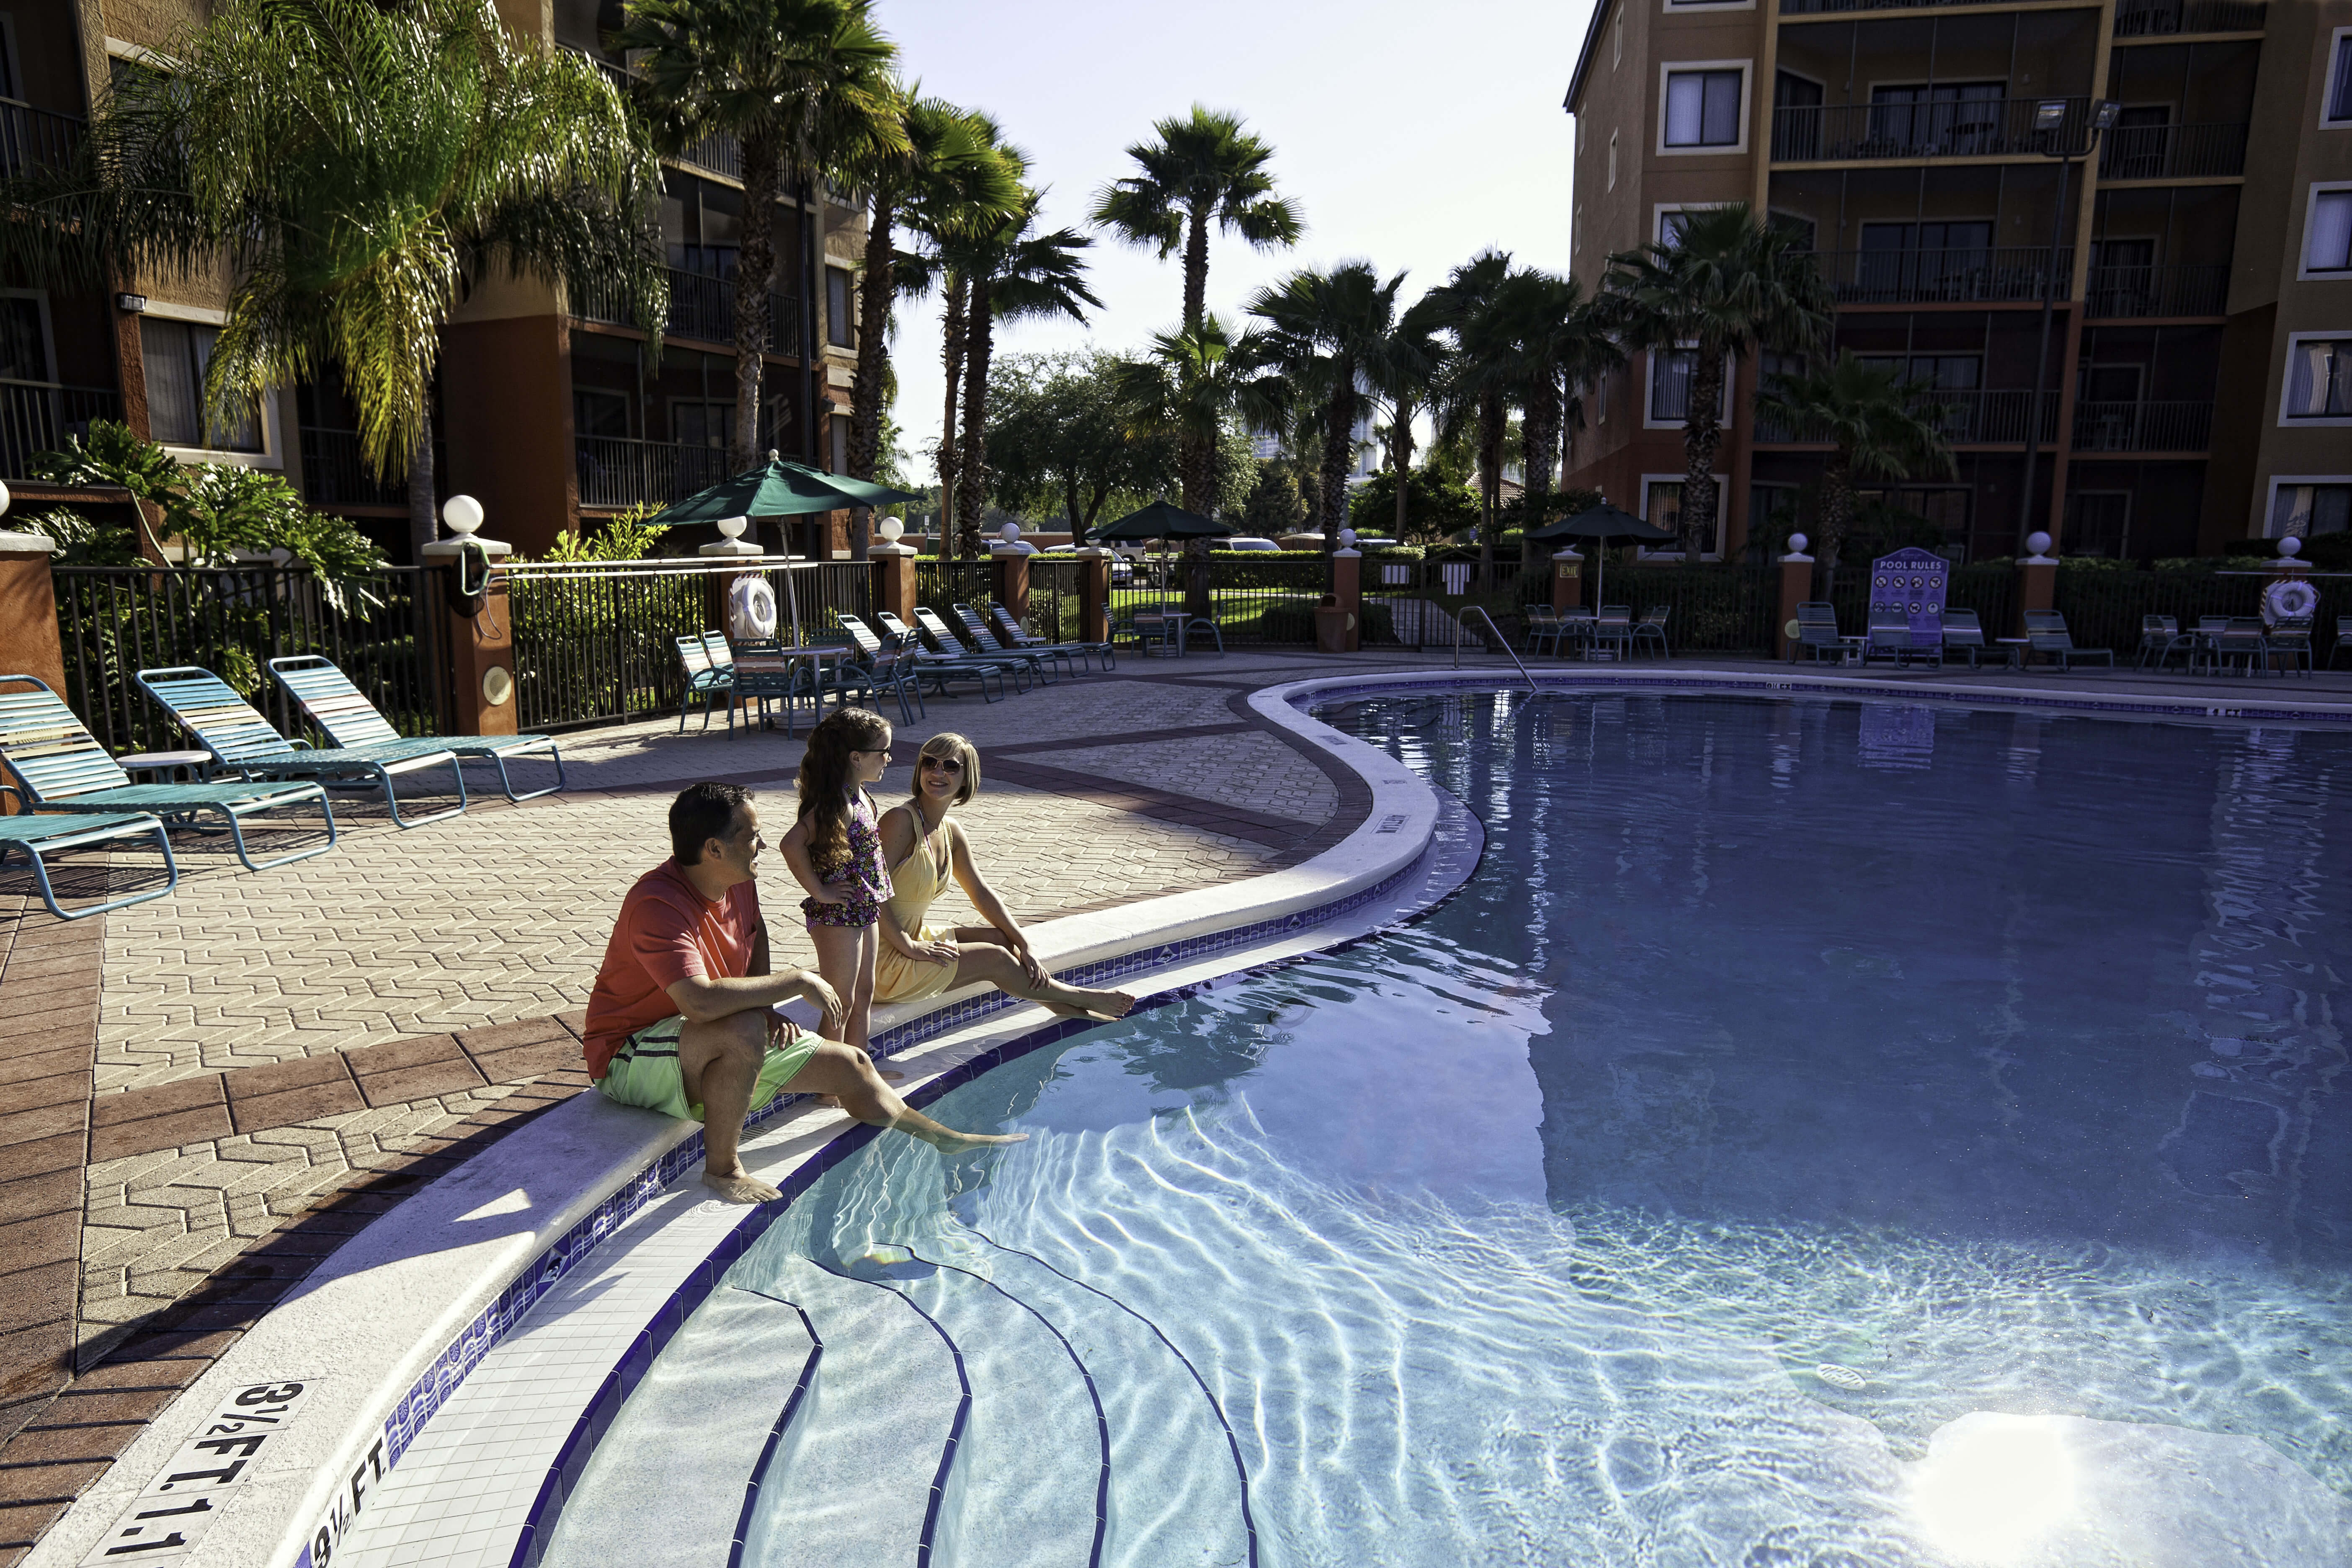 Westgate Lakes Resort And Spa Offers The Ideal Orlando Vacation Getaway